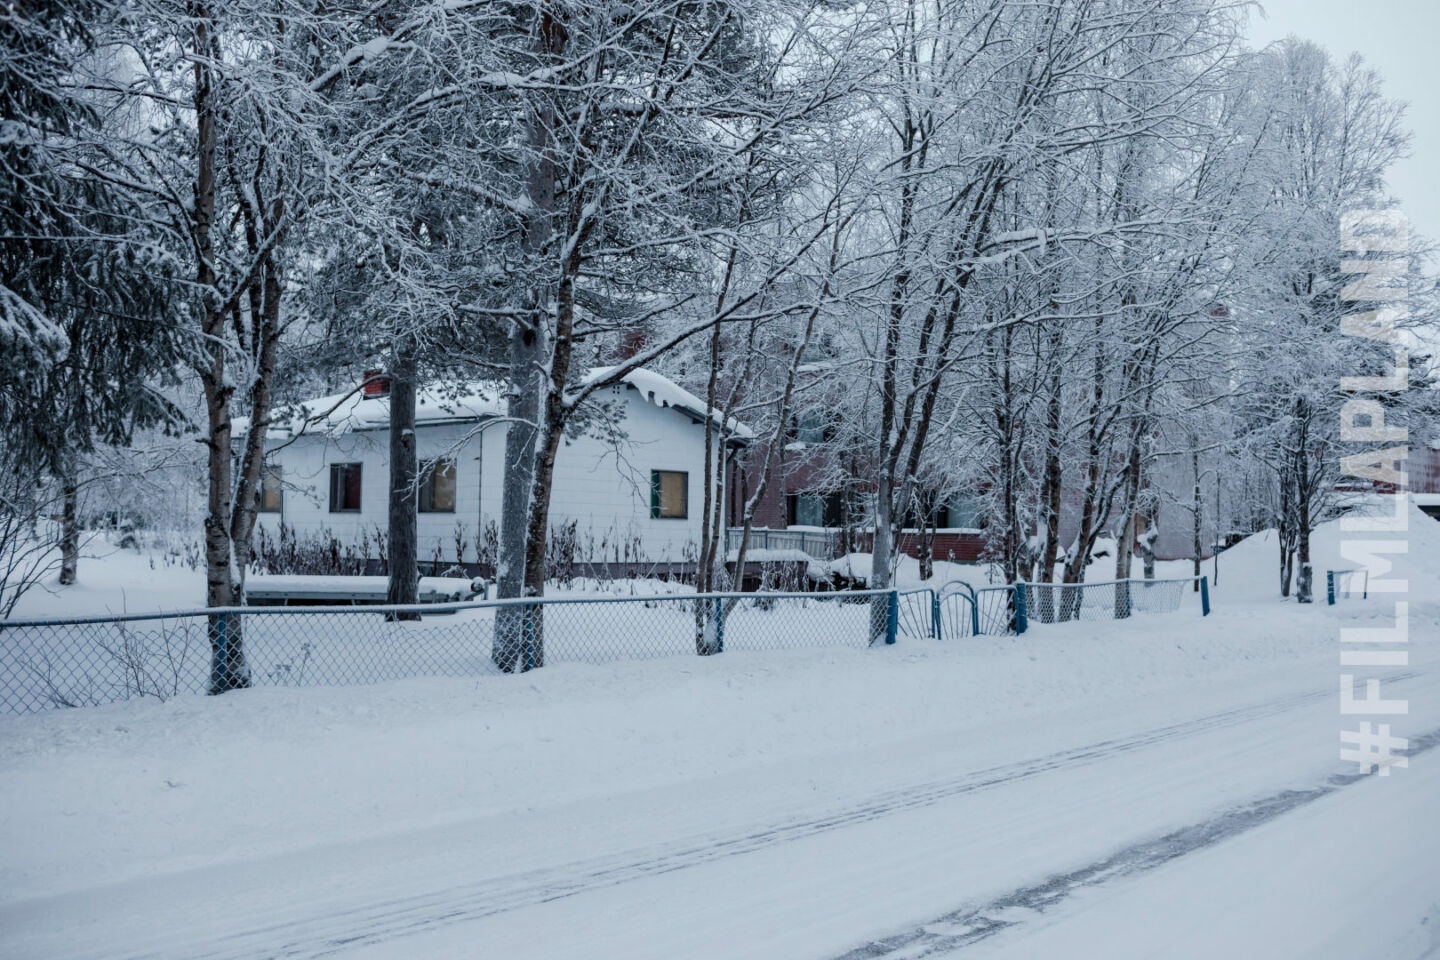 A small home and fence in the retro town Sodankylä, a top filming location in Finland